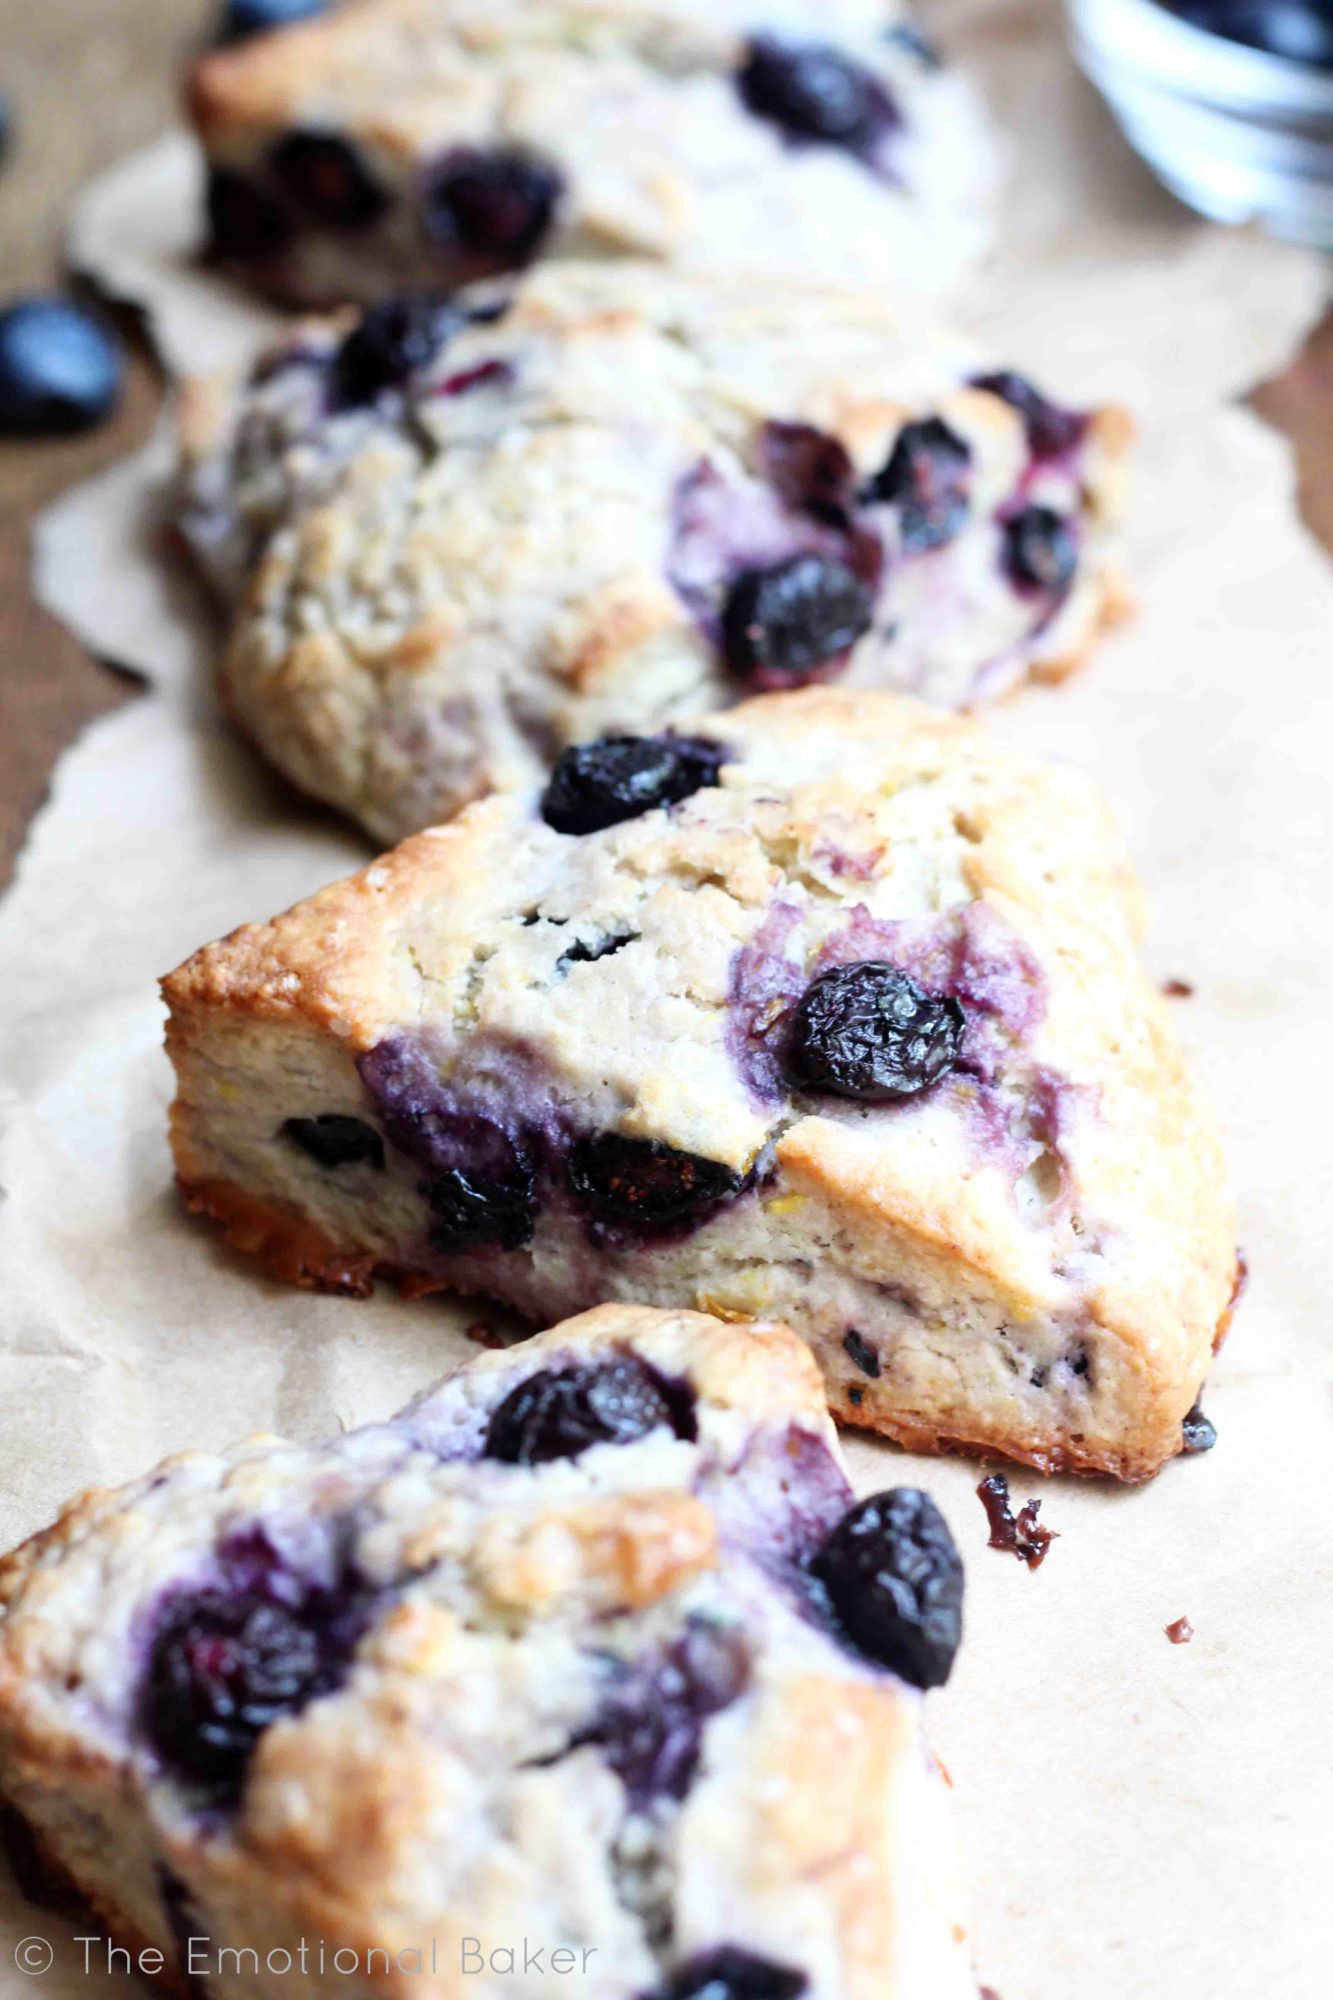 Summer breakfasts just got sweeter. Treat yourself and your loved ones to a Blueberry Scone. These are bursting with berries with a hint of lemon.